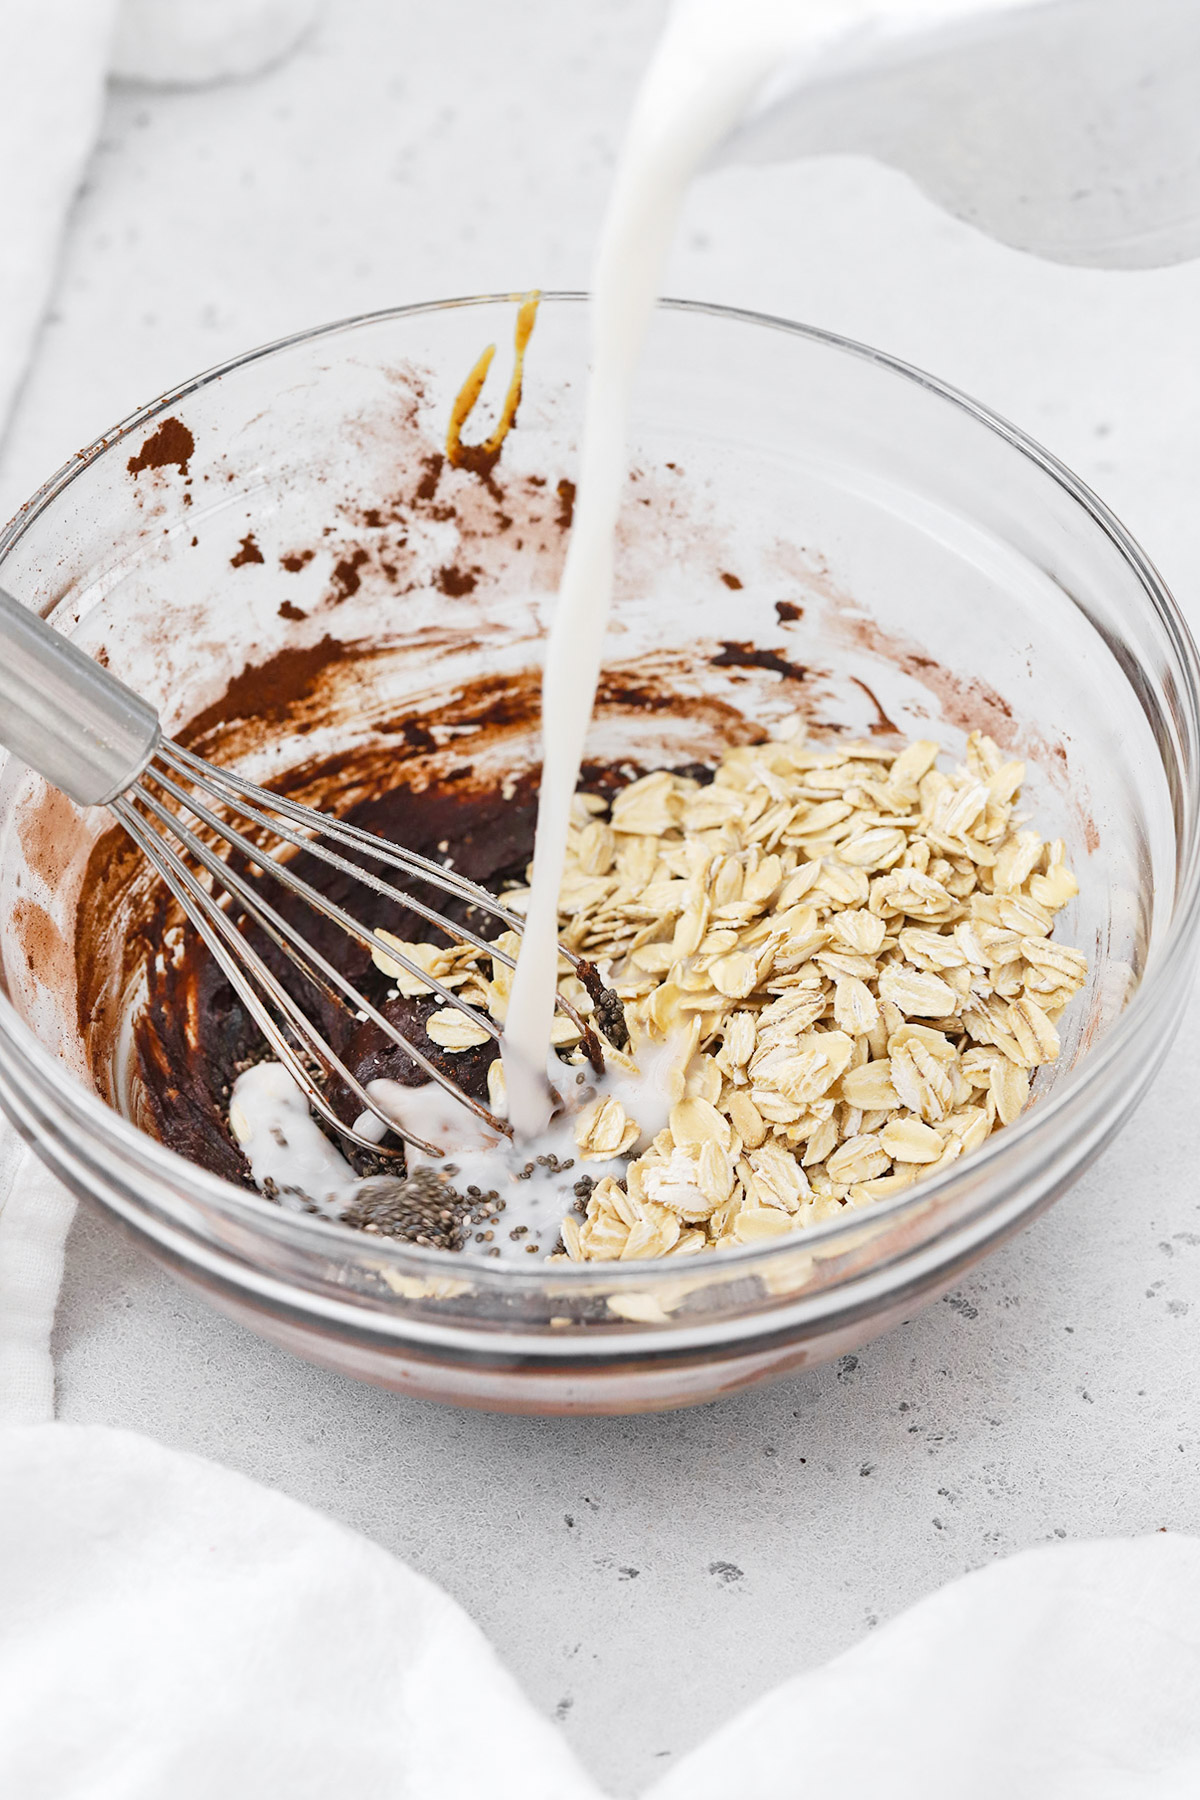 Whisking in milk to make chocolate peanut butter overnight oats